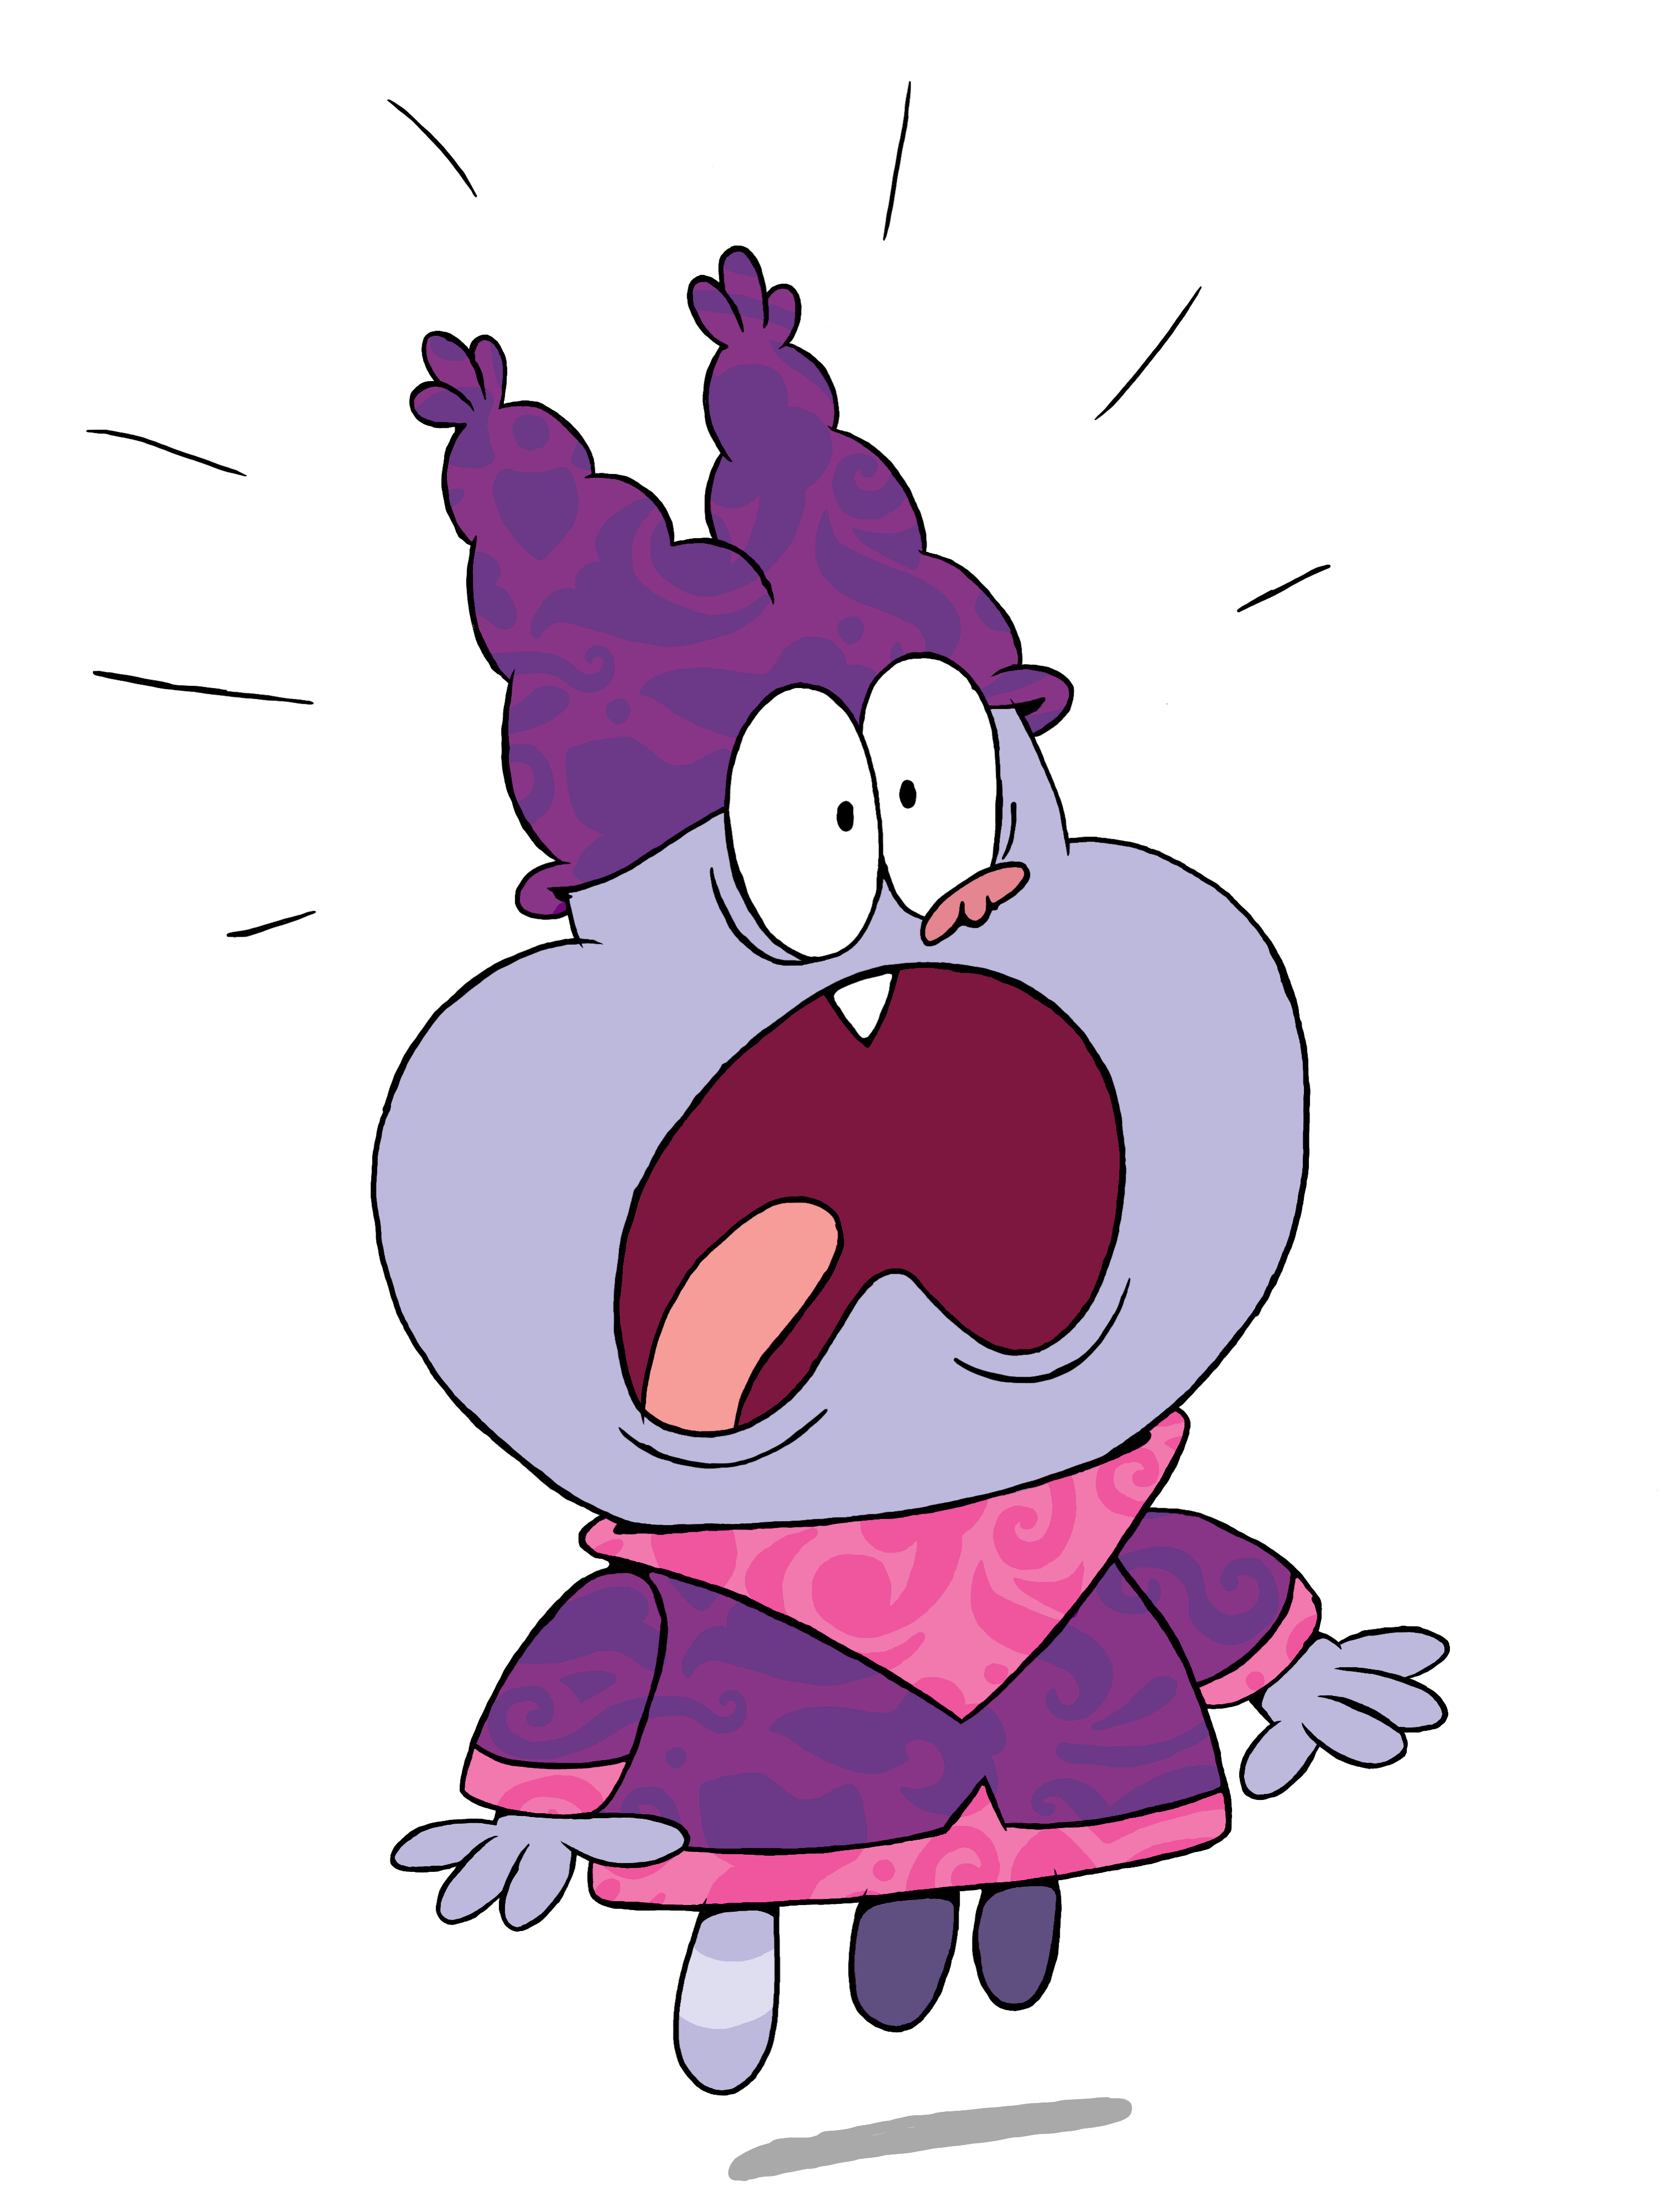 Chowder is Screaming Render PNG by seanscreations1 on DeviantArt